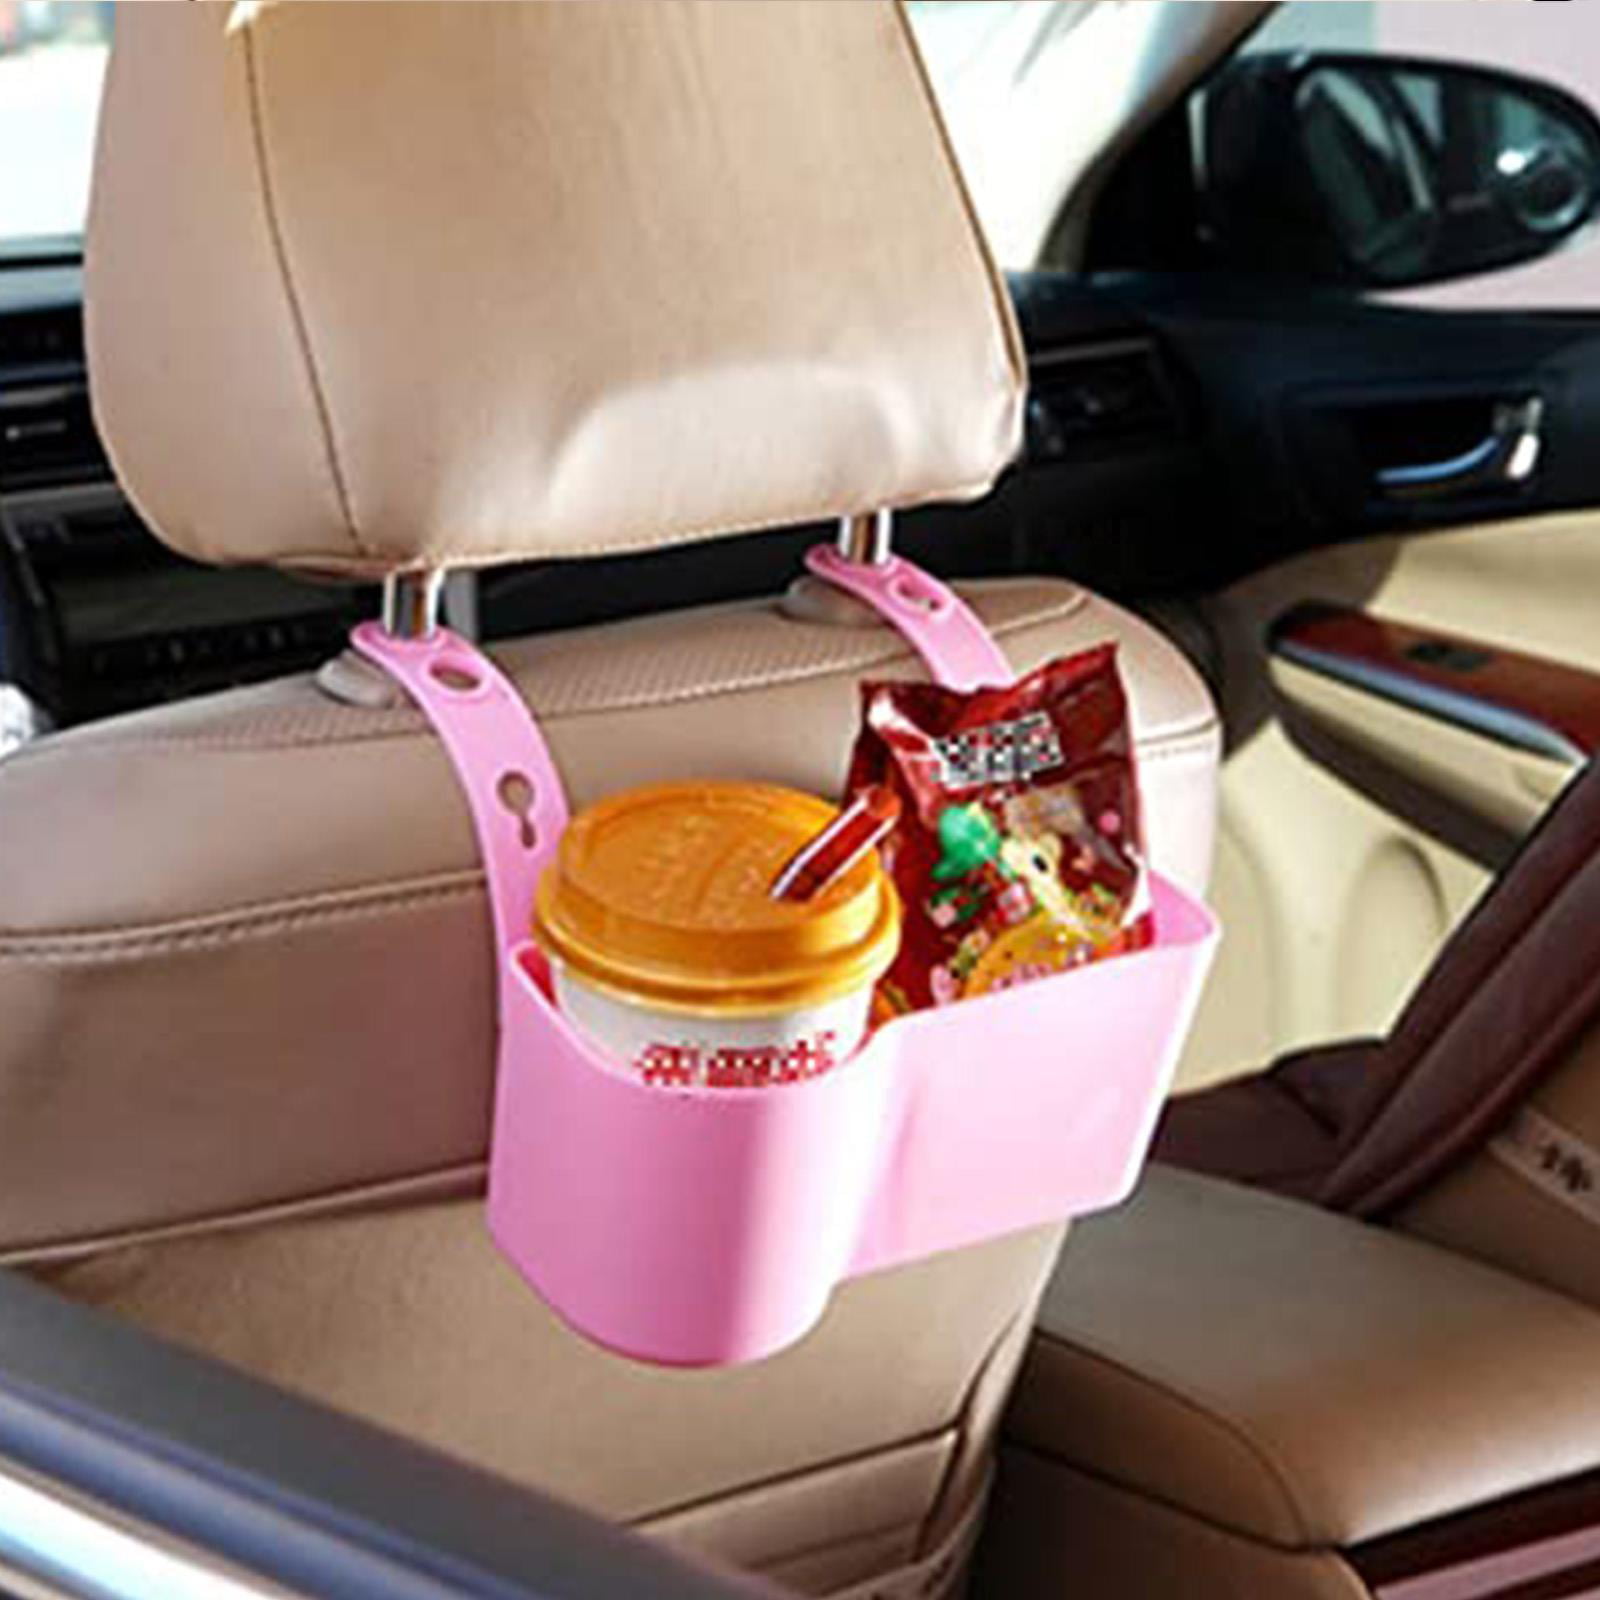 Mount-It! Headrest Cup Holder | Car Back Seat Organizer to Keep Kids  Entertained - Cup Holder Tray for Car Holds Drinks, Food & Phones/Tablets 